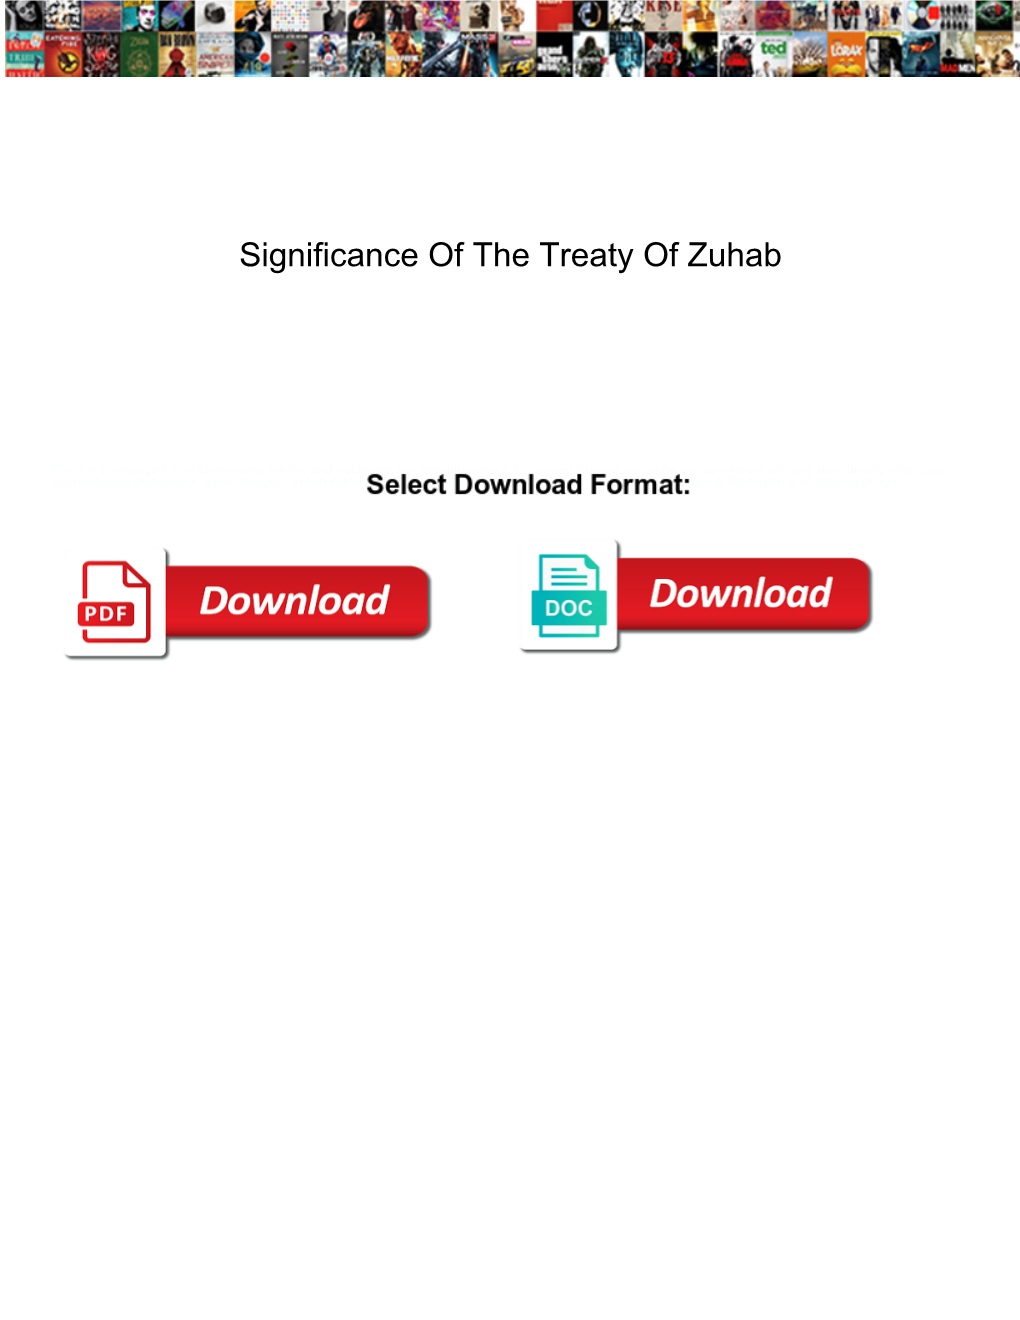 Significance of the Treaty of Zuhab